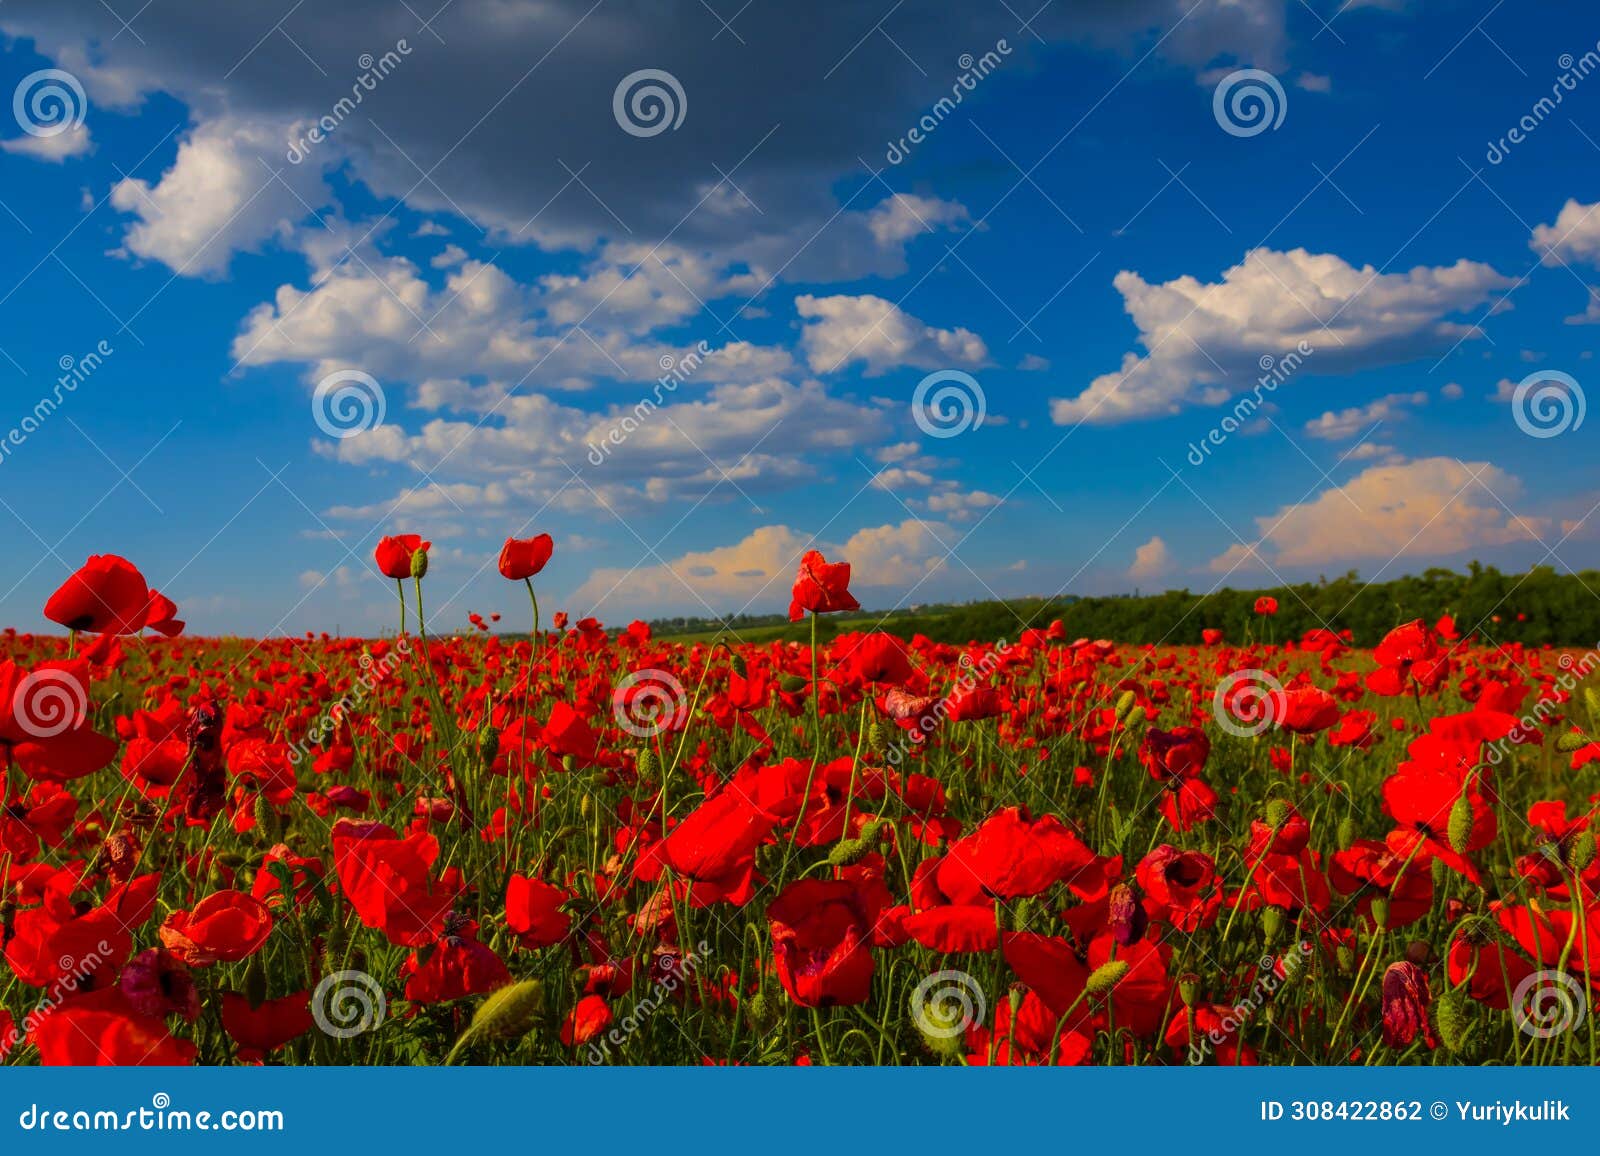 prairie covered by red poppy flowers under cloudy sky